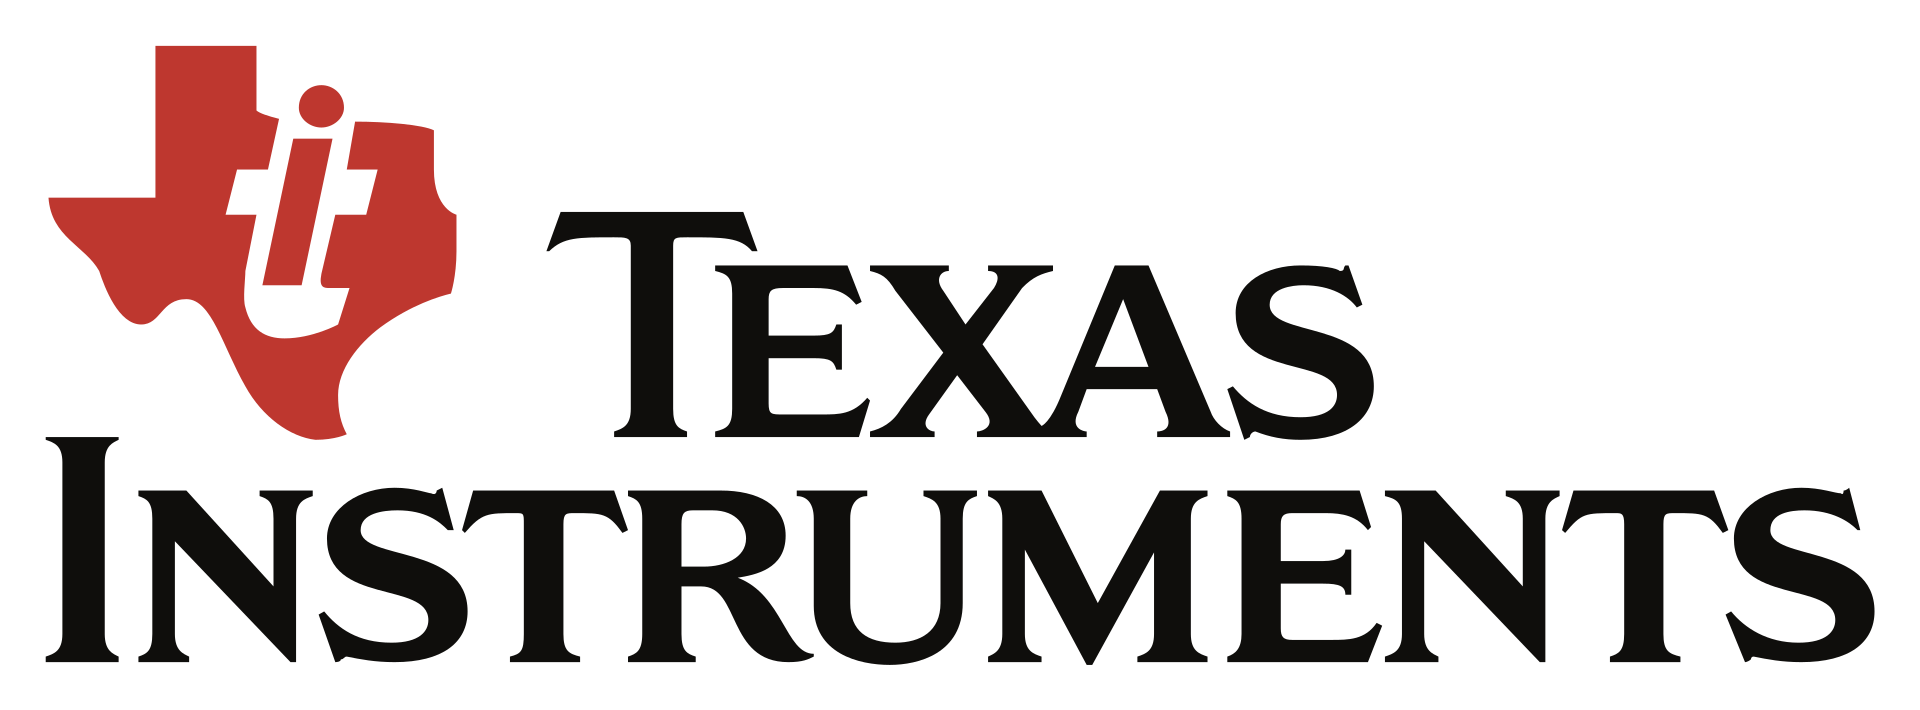 TI - Texas Instruments Incorporated